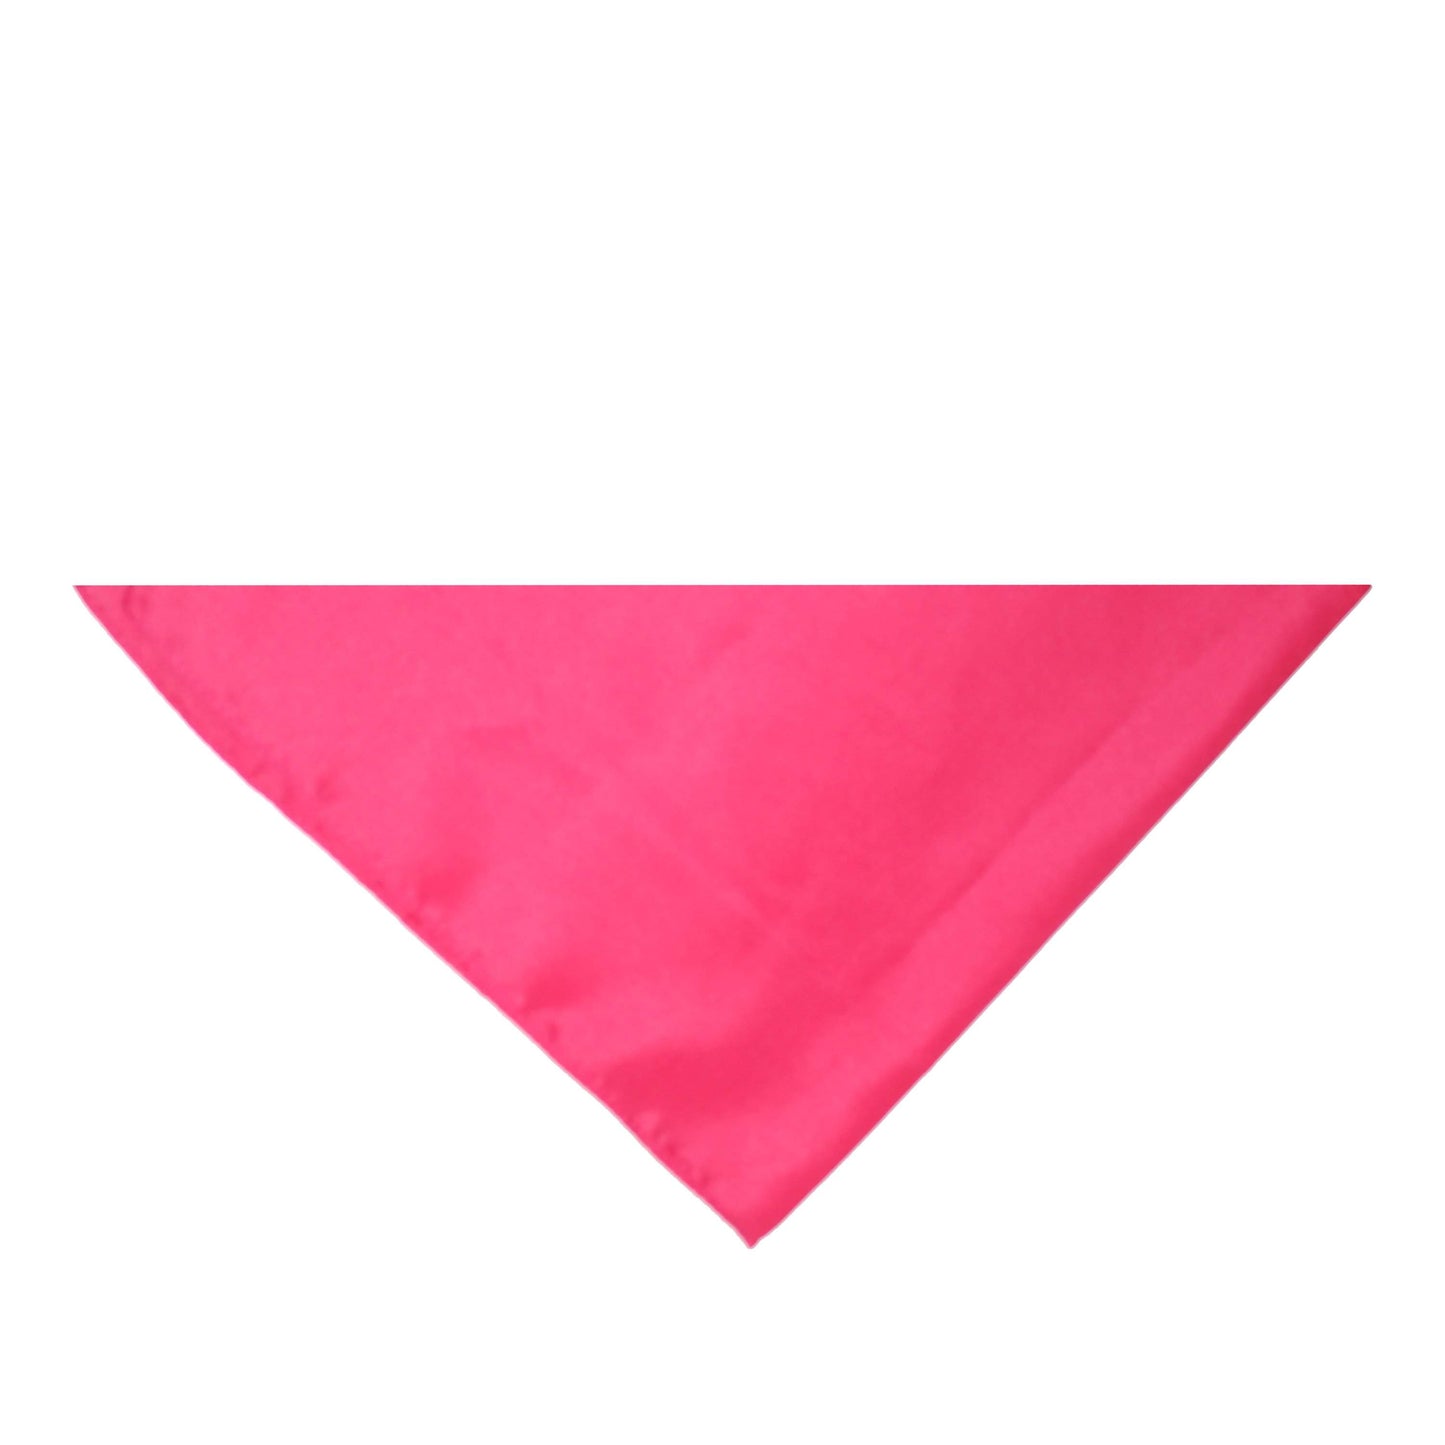 Pack of 9 Triangle Cotton Bandanas - Solid Colors and Polyester - 30 in x 20 in x 20 in